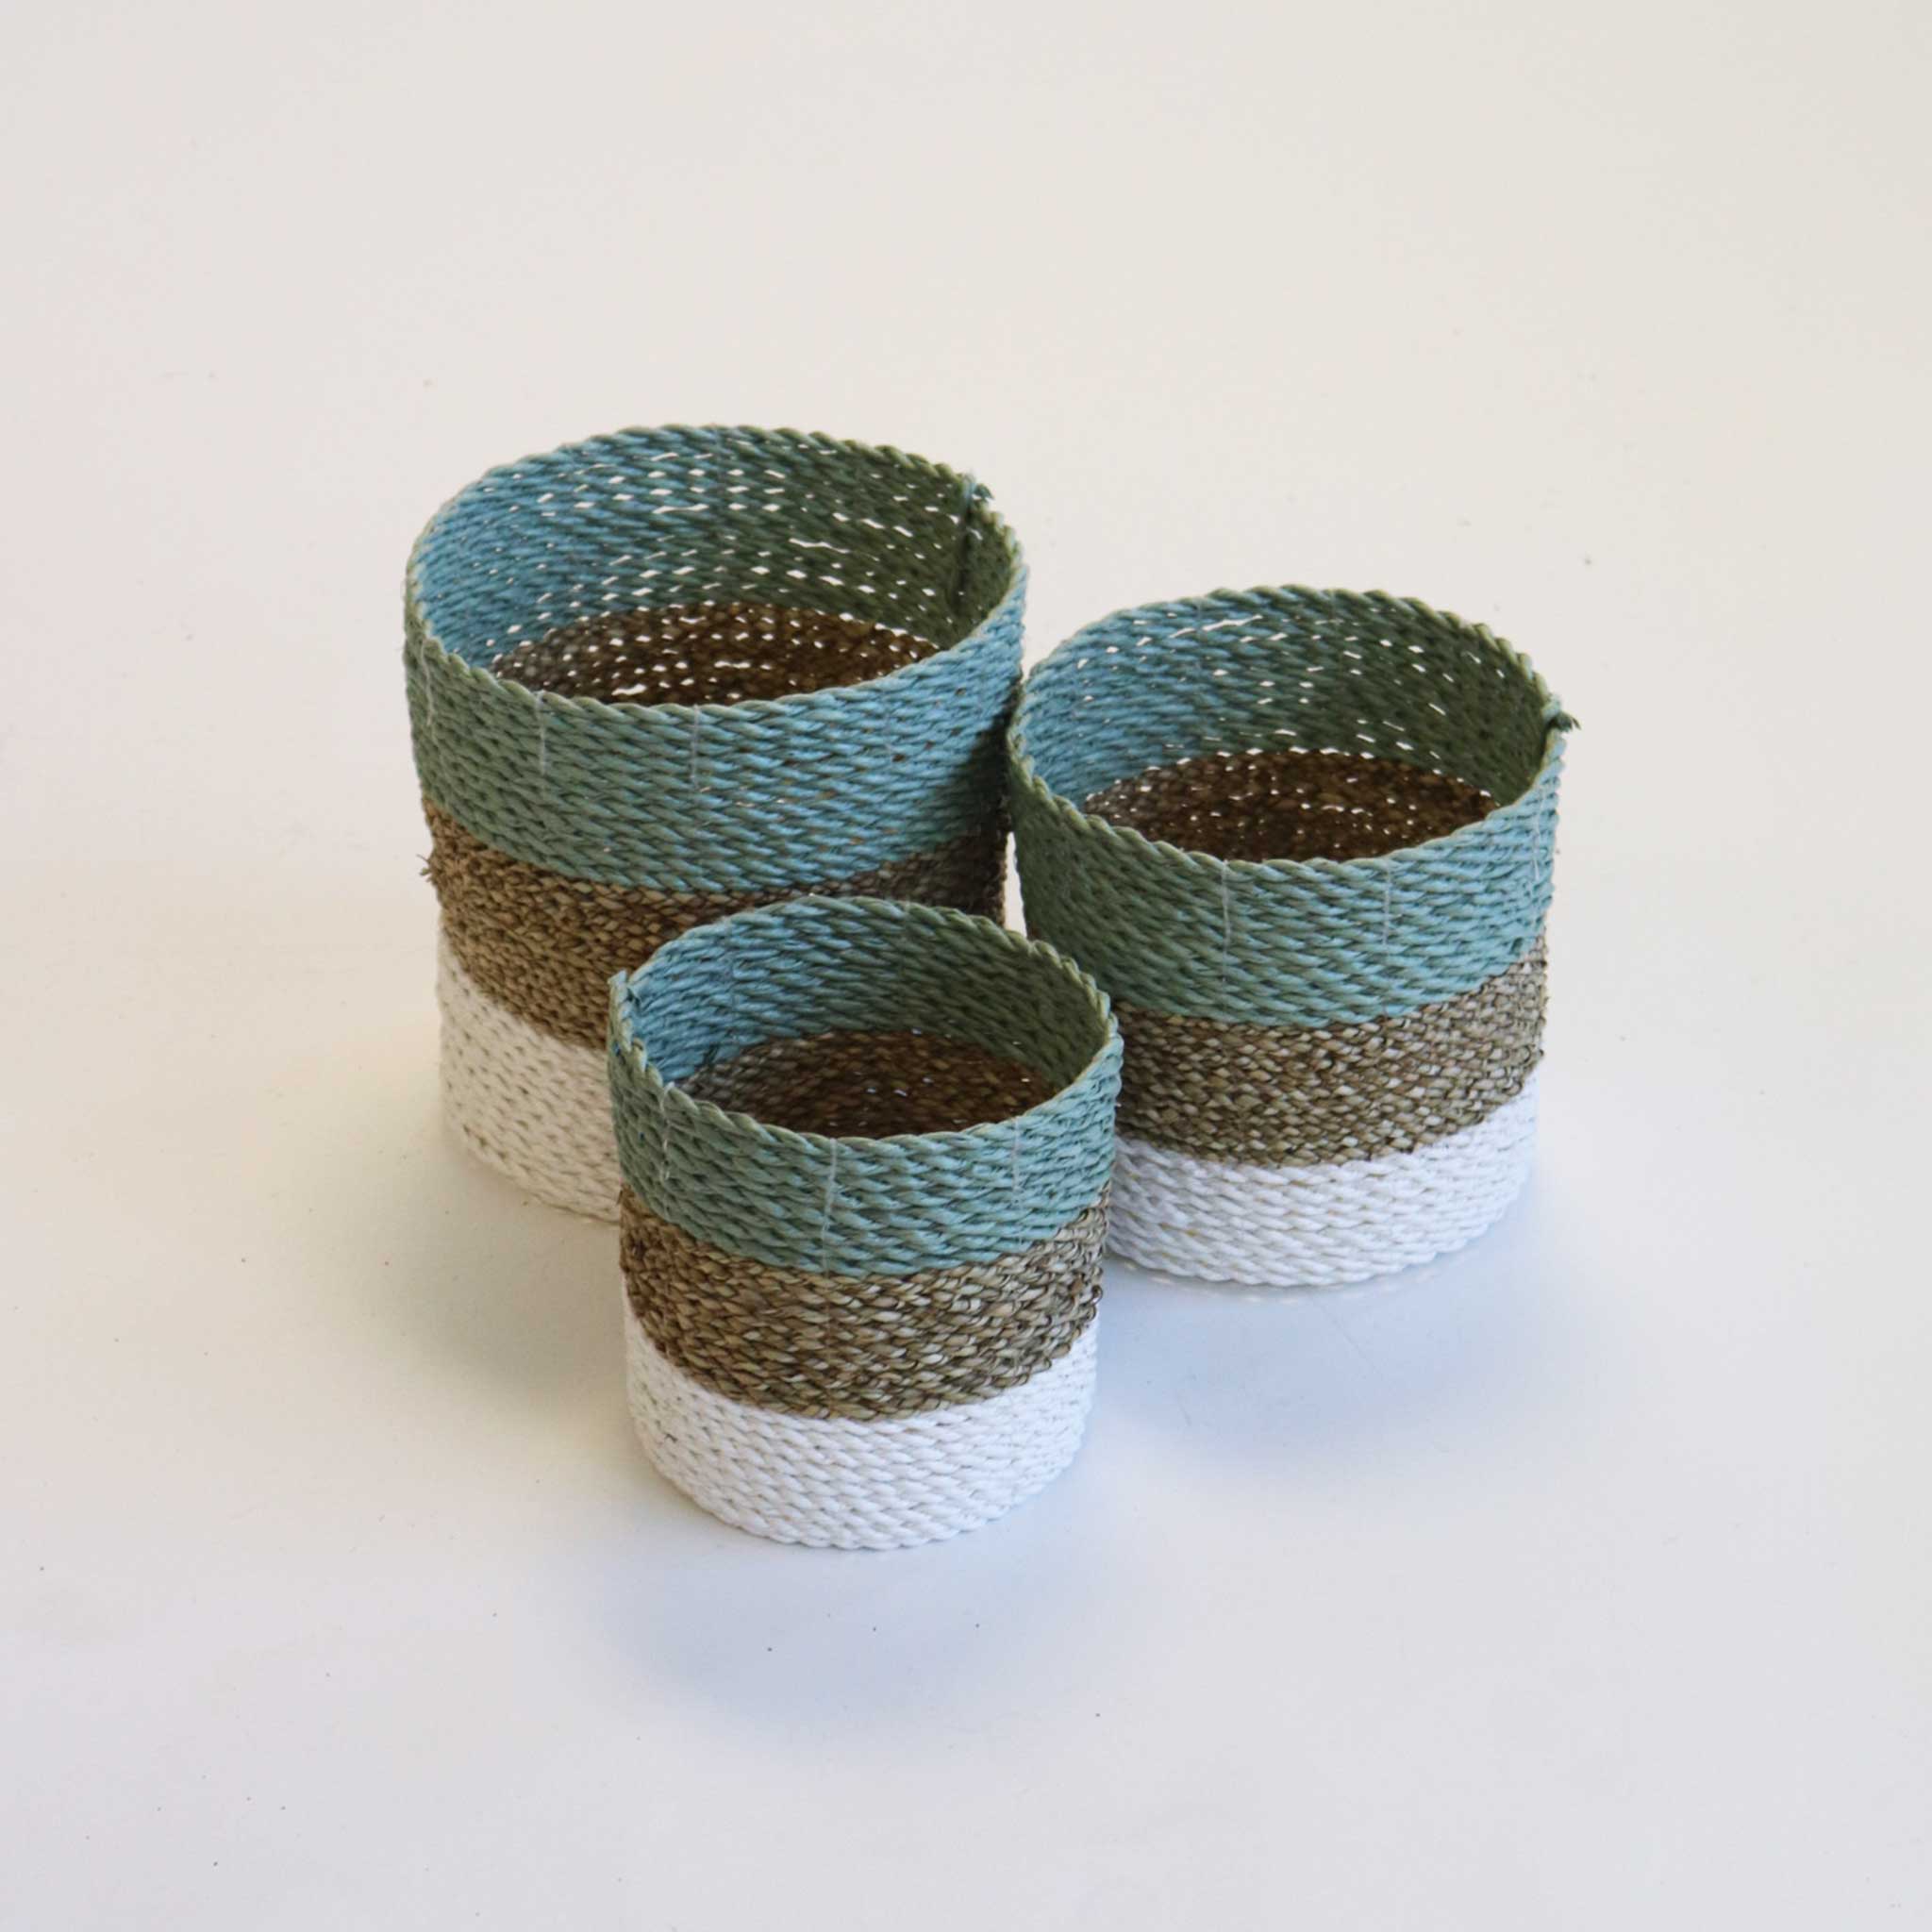 Small Green, Natural and White Baskets